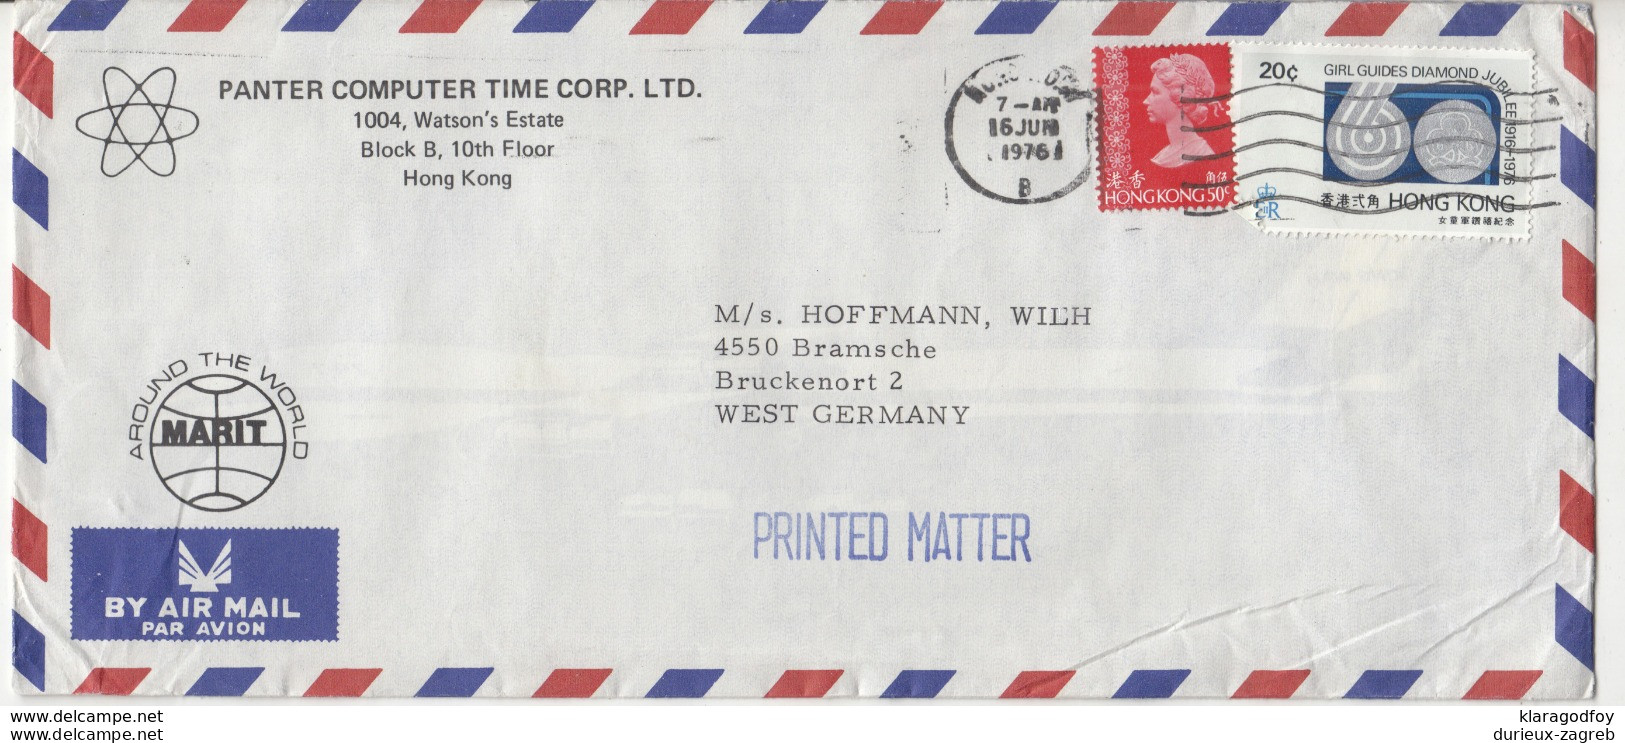 Panter Computer Time Corp. Company Air Mail Letter Cover Travelled 1976 To Germany B190922 - Storia Postale